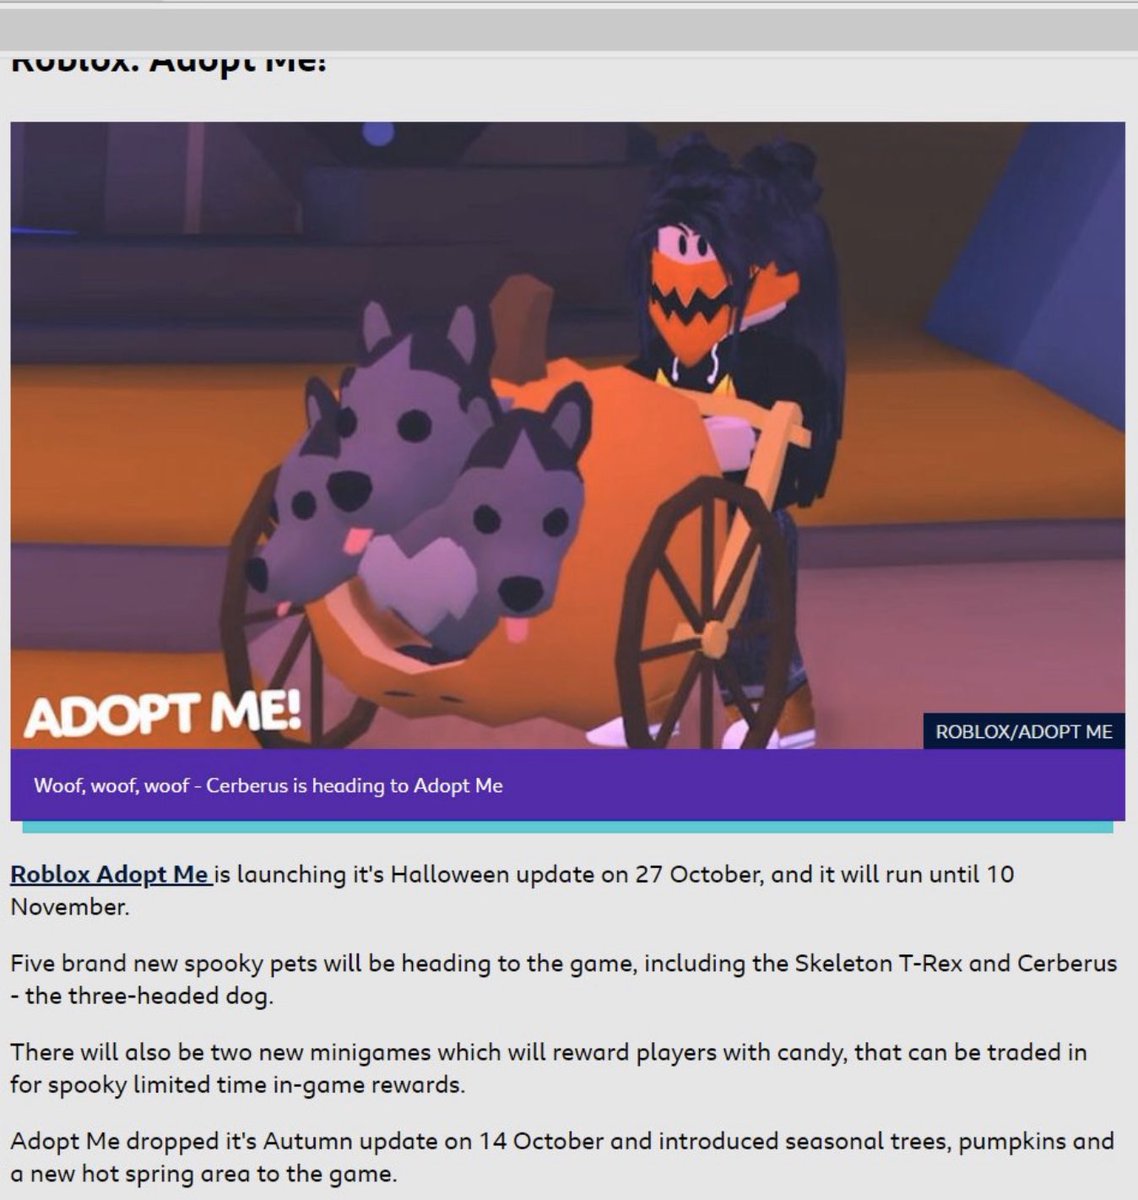 Dayjeeeplays On Twitter According To The Bbc Adopt Me Is Releasing Their Halloween Update Today The 27th Of October It Also States That It Ends On November 10 You Have Two - cerberus login roblox